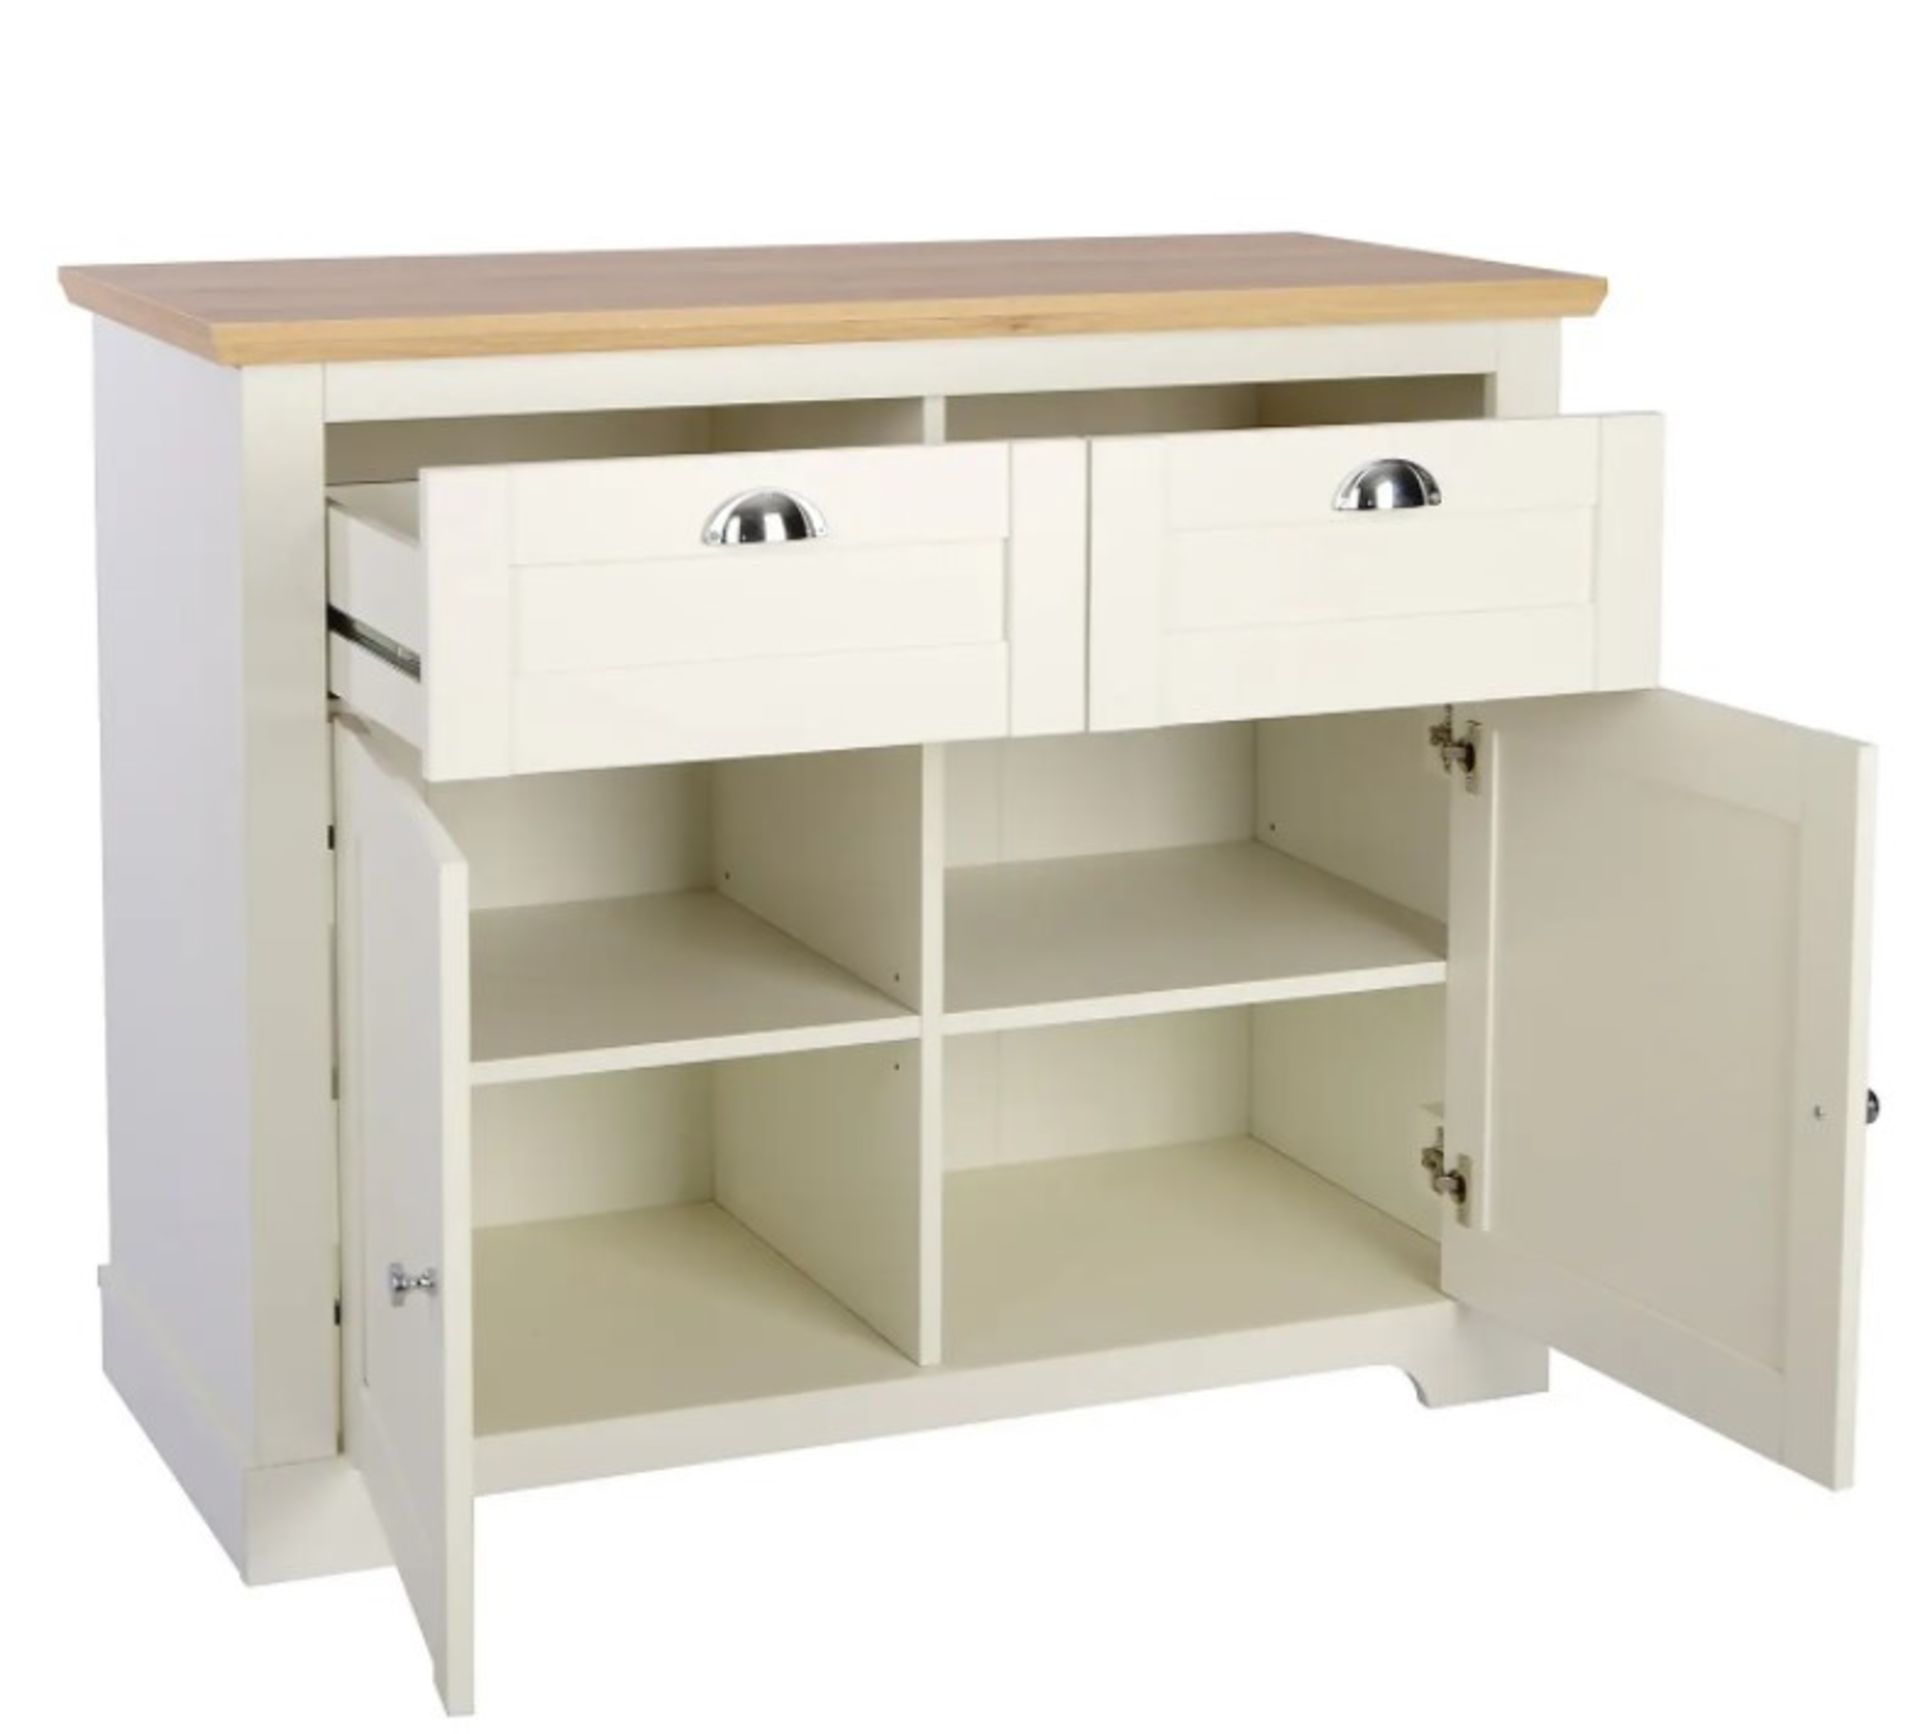 (10E) 1x Diva Compact Sideboard Ivory RRP £180. (H83x W100.5x D45cm). Ivory Finish With Oak Effect - Image 2 of 5